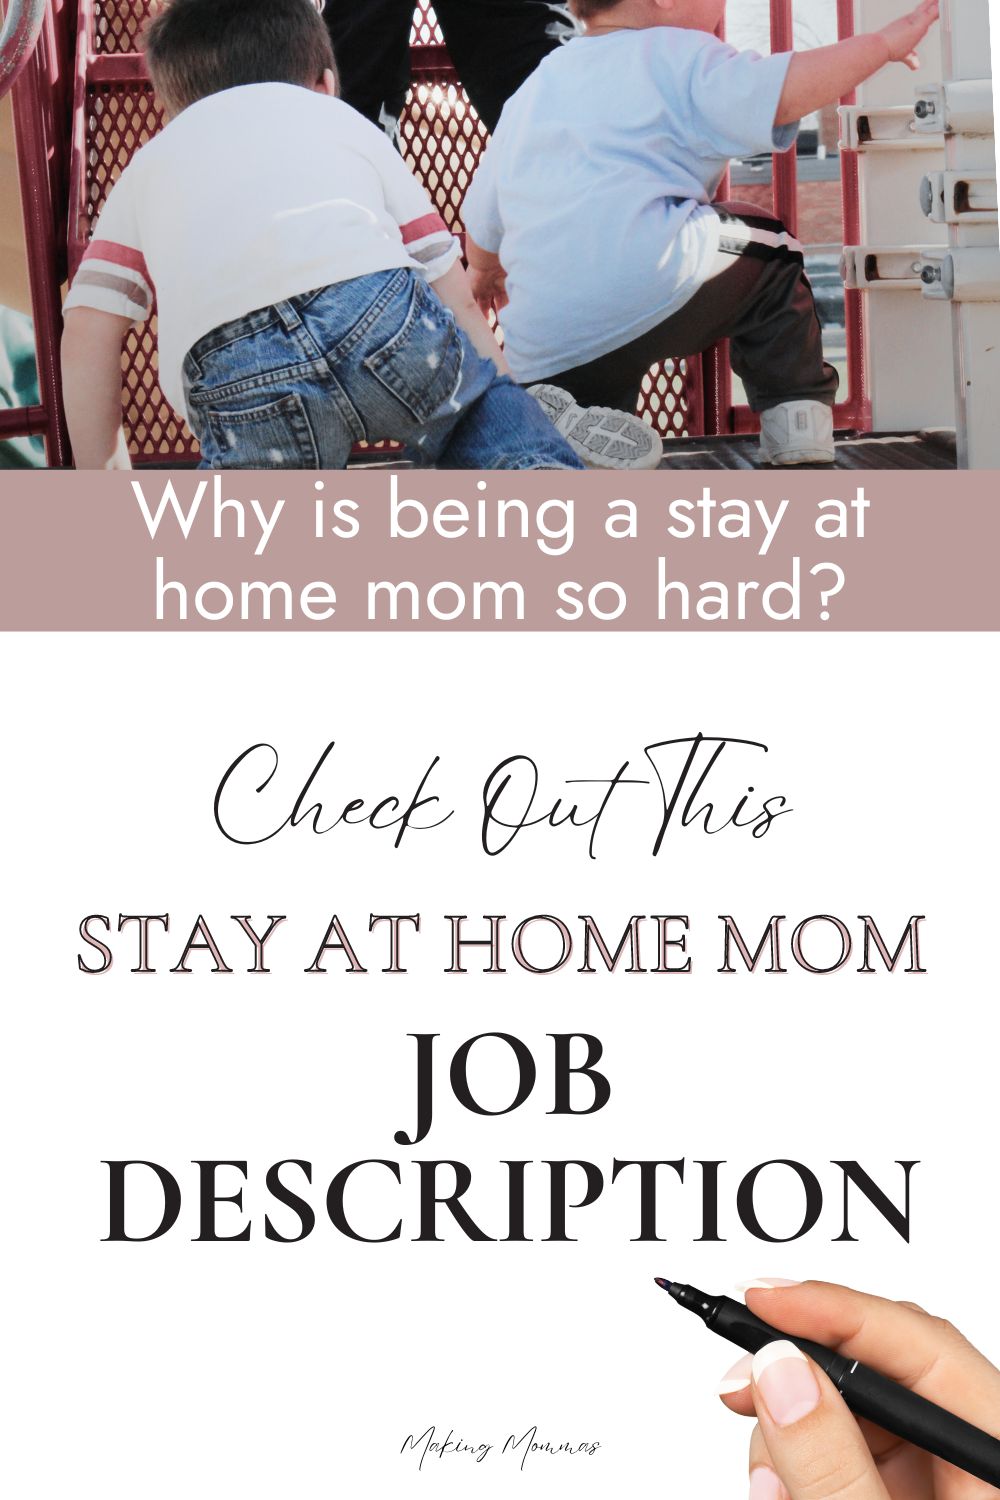 Pin image reading, "Why is being a stay at home mom so hard? Check out this stay at home mom job description" with an image of little boys climbing up a ladder for a slide.